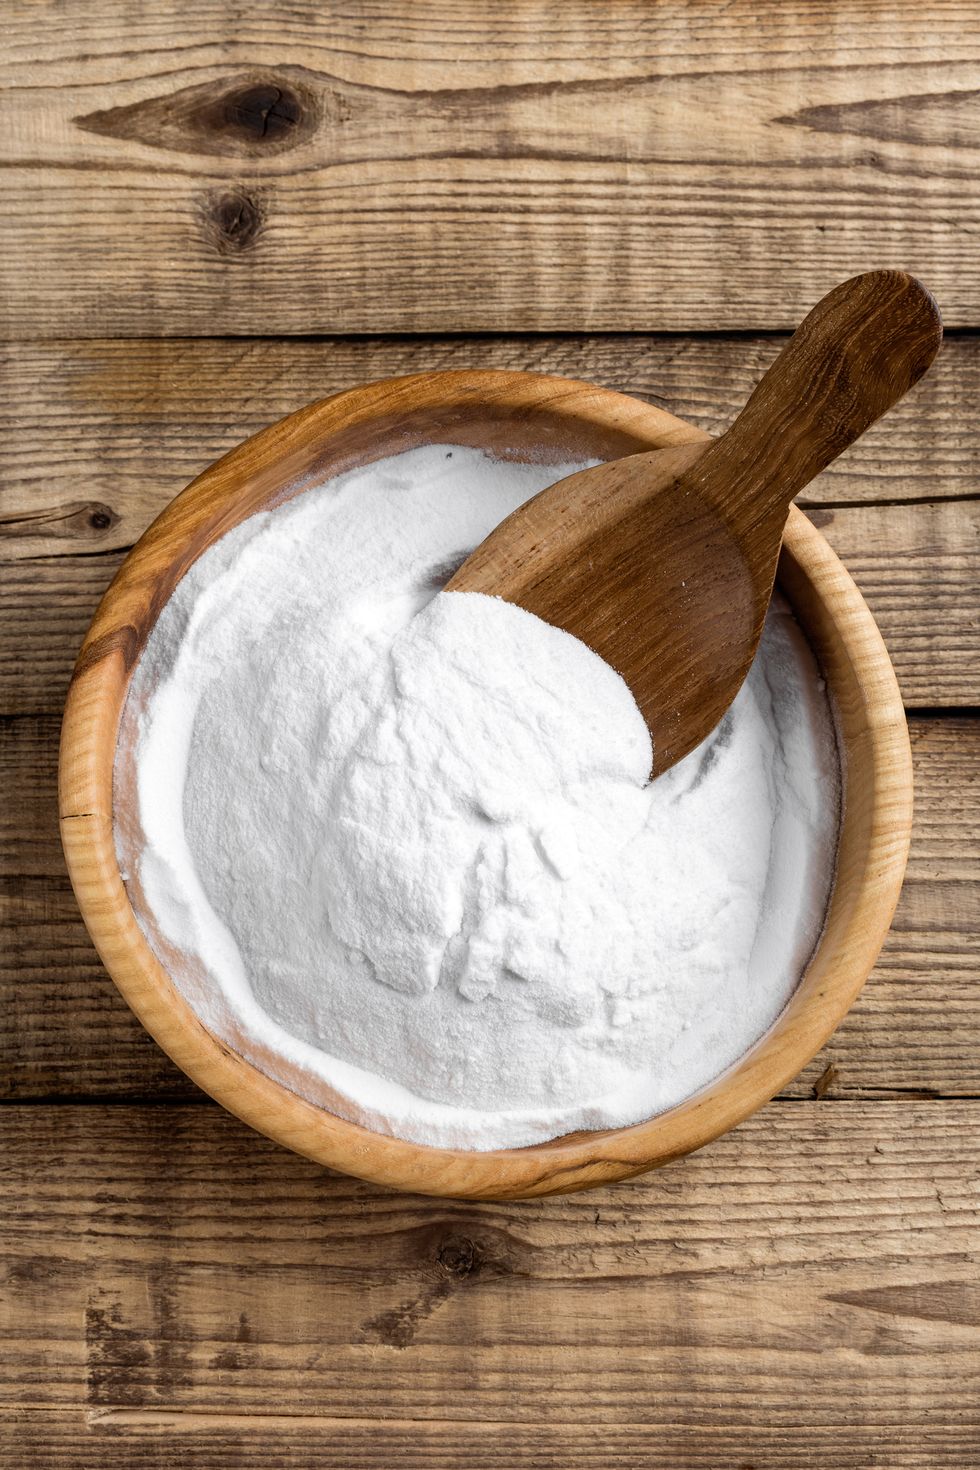 8 Substitutes for Baking Powder to Use When You Run Out